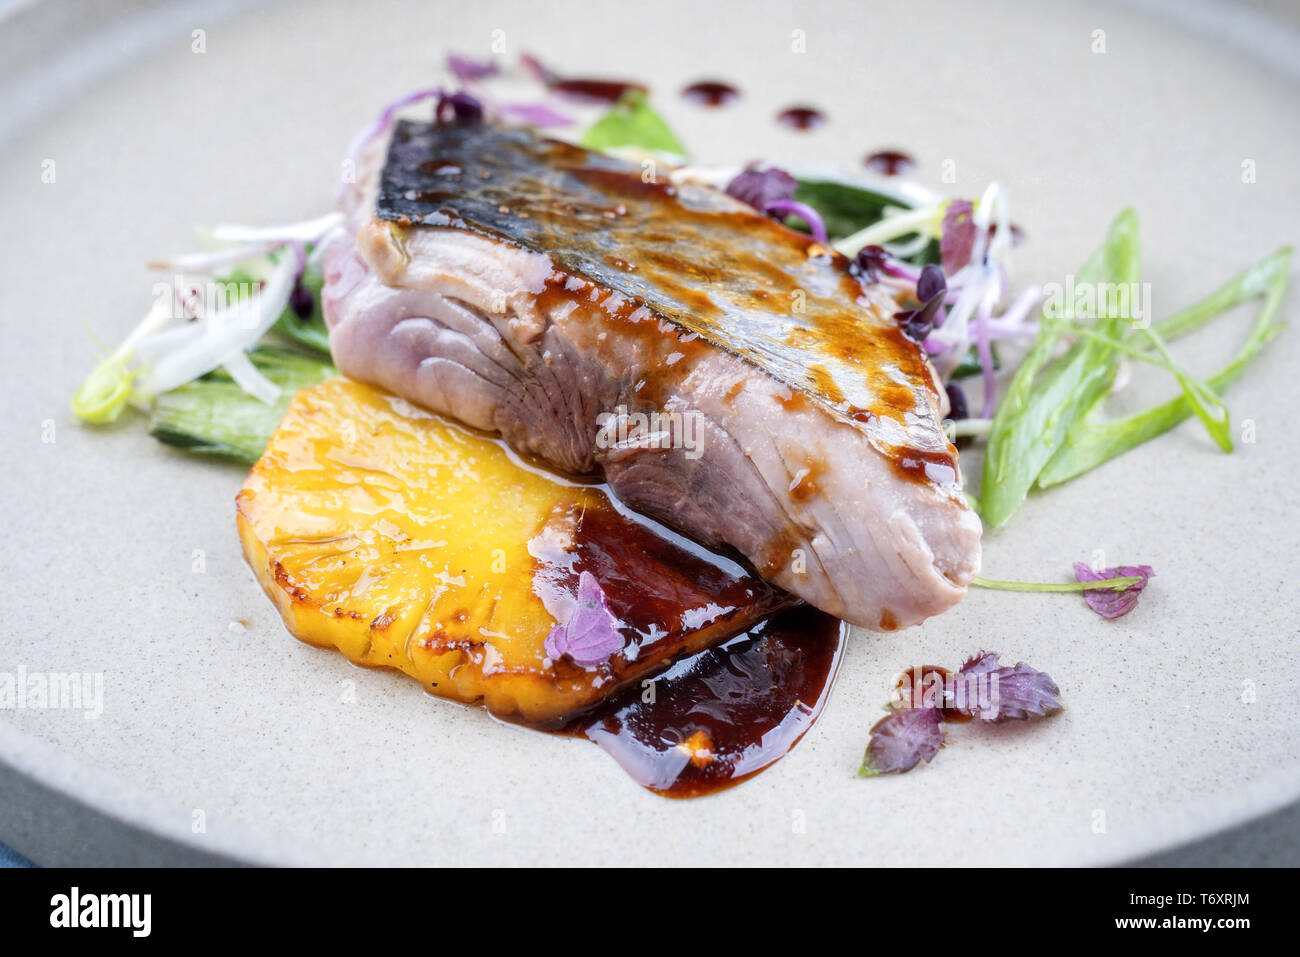 Modern style Japanese bonito tuna fish filet with vegetable and pineapple glazed in teriyaki sauce as closeup on a plate Stock Photo